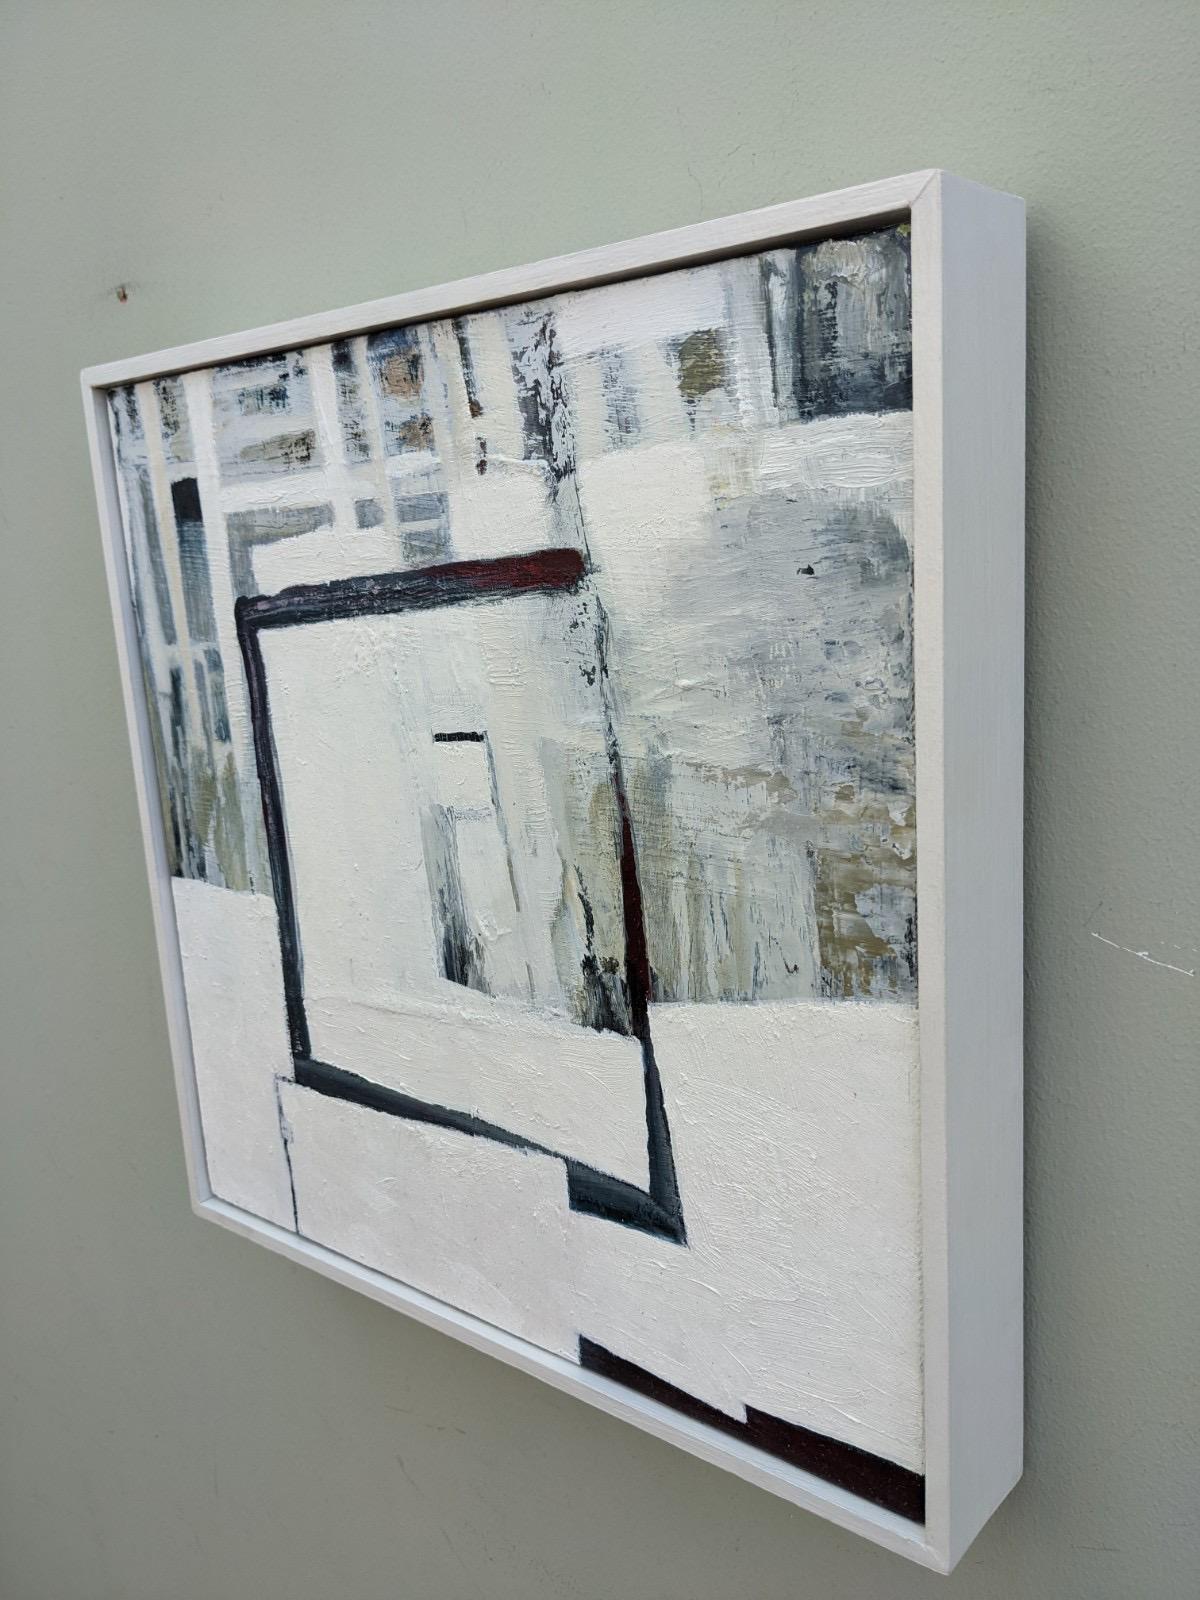 ZONES
Size: 32 x 32 cm (including frame)
Oil on board

A stunning abstract composition in oil, painted by British artist Marian Hyland. The painting is housed in a handmade frame (by the artist) which has been crafted specifically for the painting